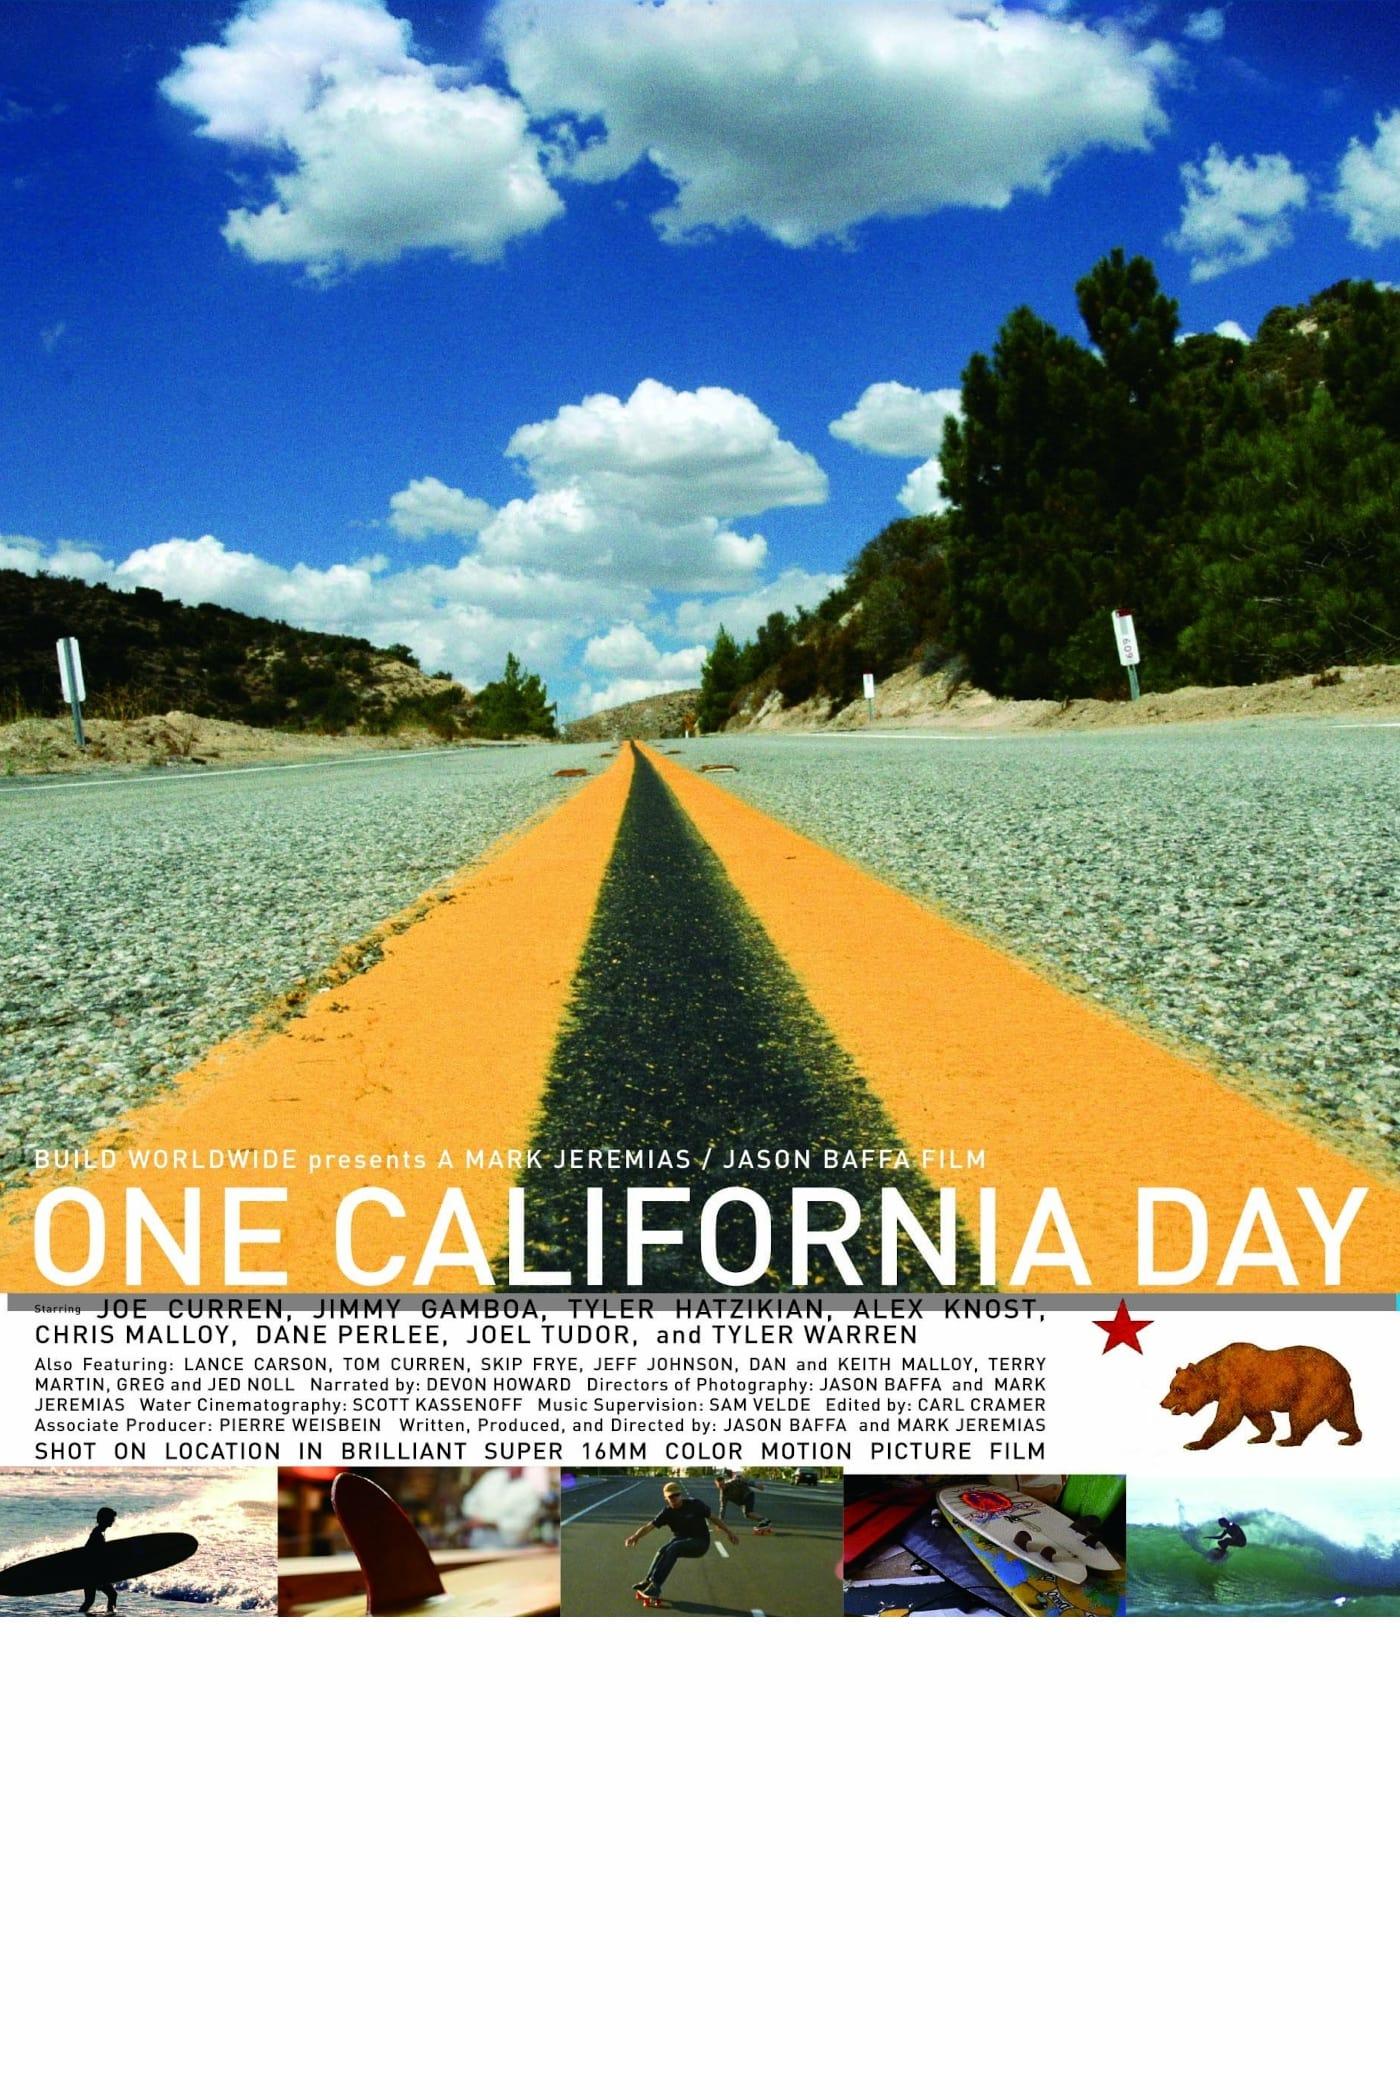 One California Day poster